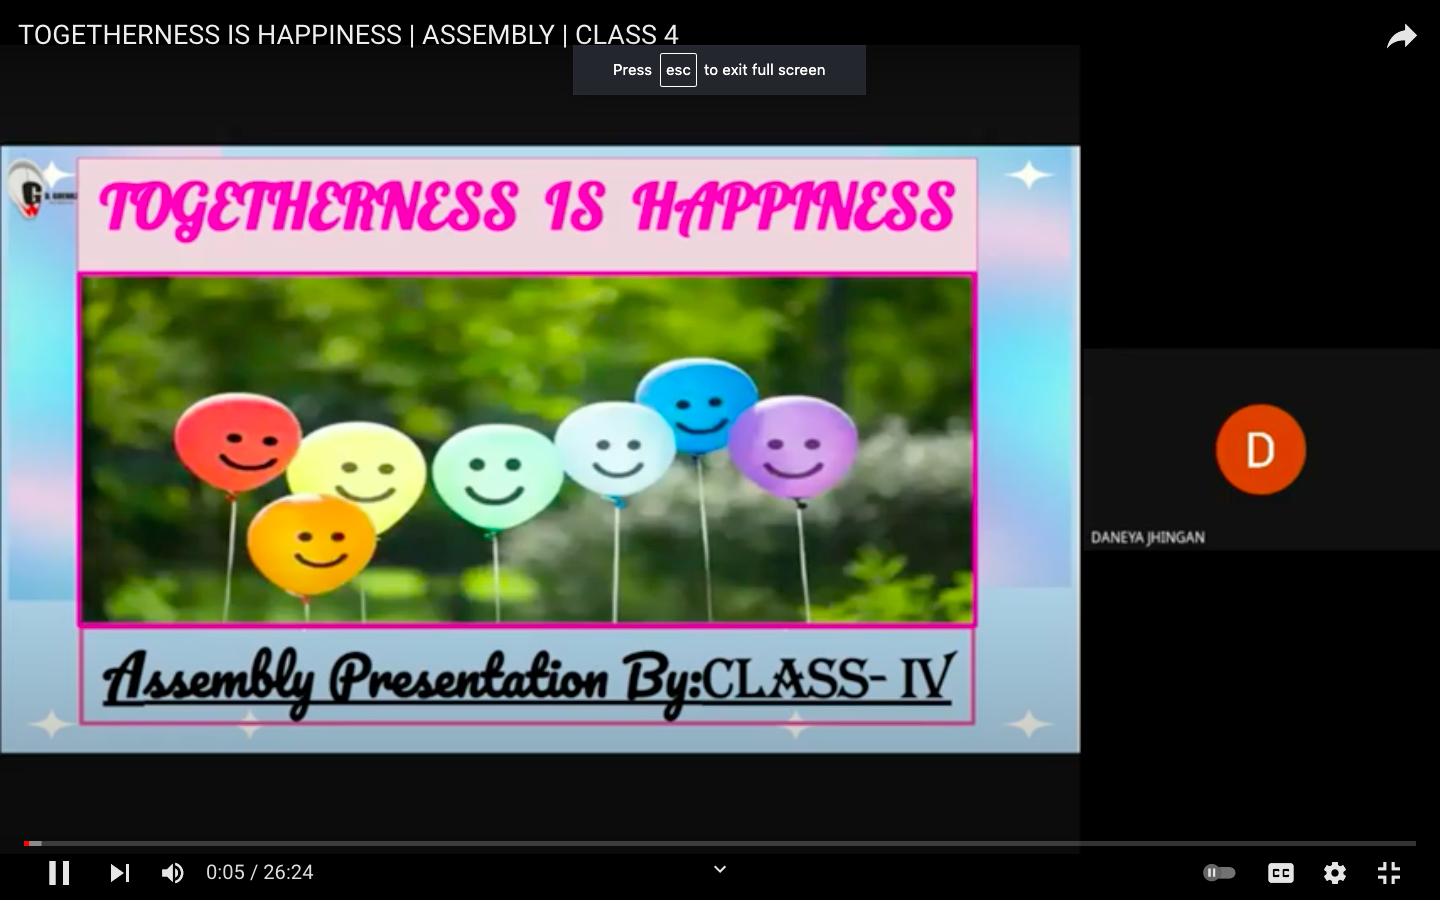 ASSEMBLY- ‘TOGETHERNESS IS HAPPINESS’